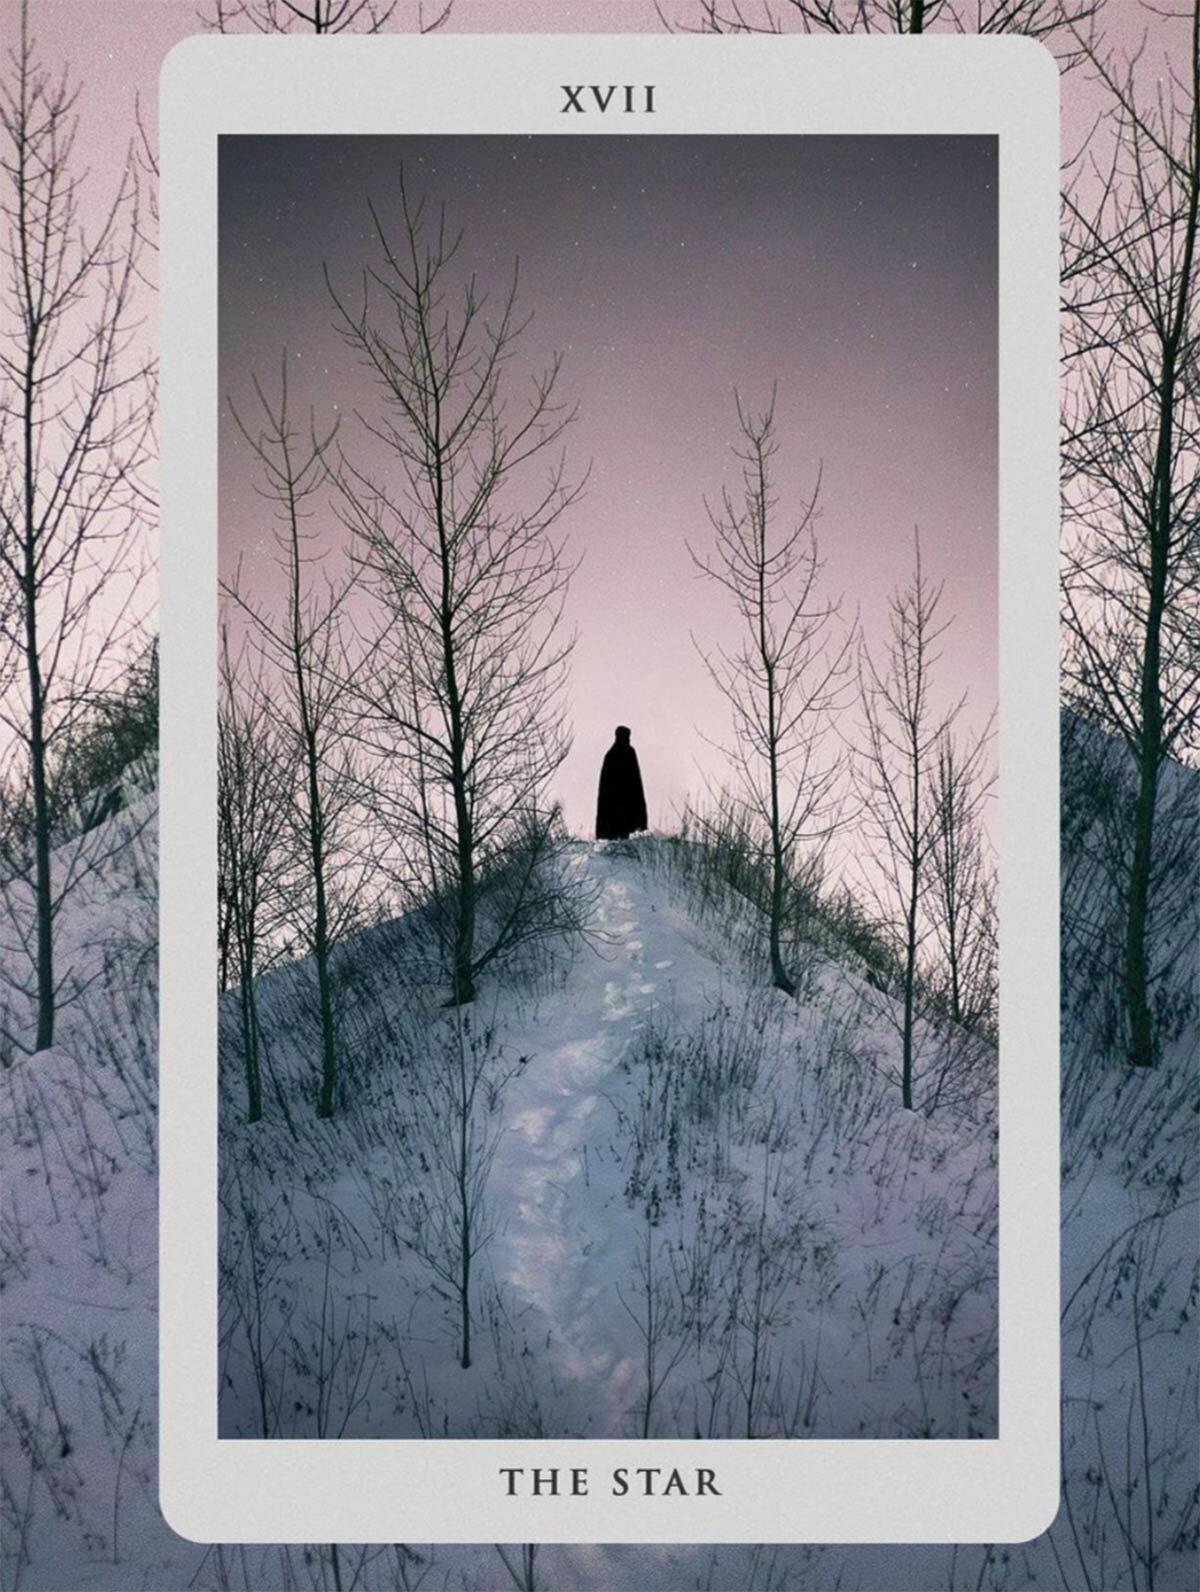 The “Somnia Tarot” deck includes 78 images by Nicolas Bruno. “The Star” image via Instagram.